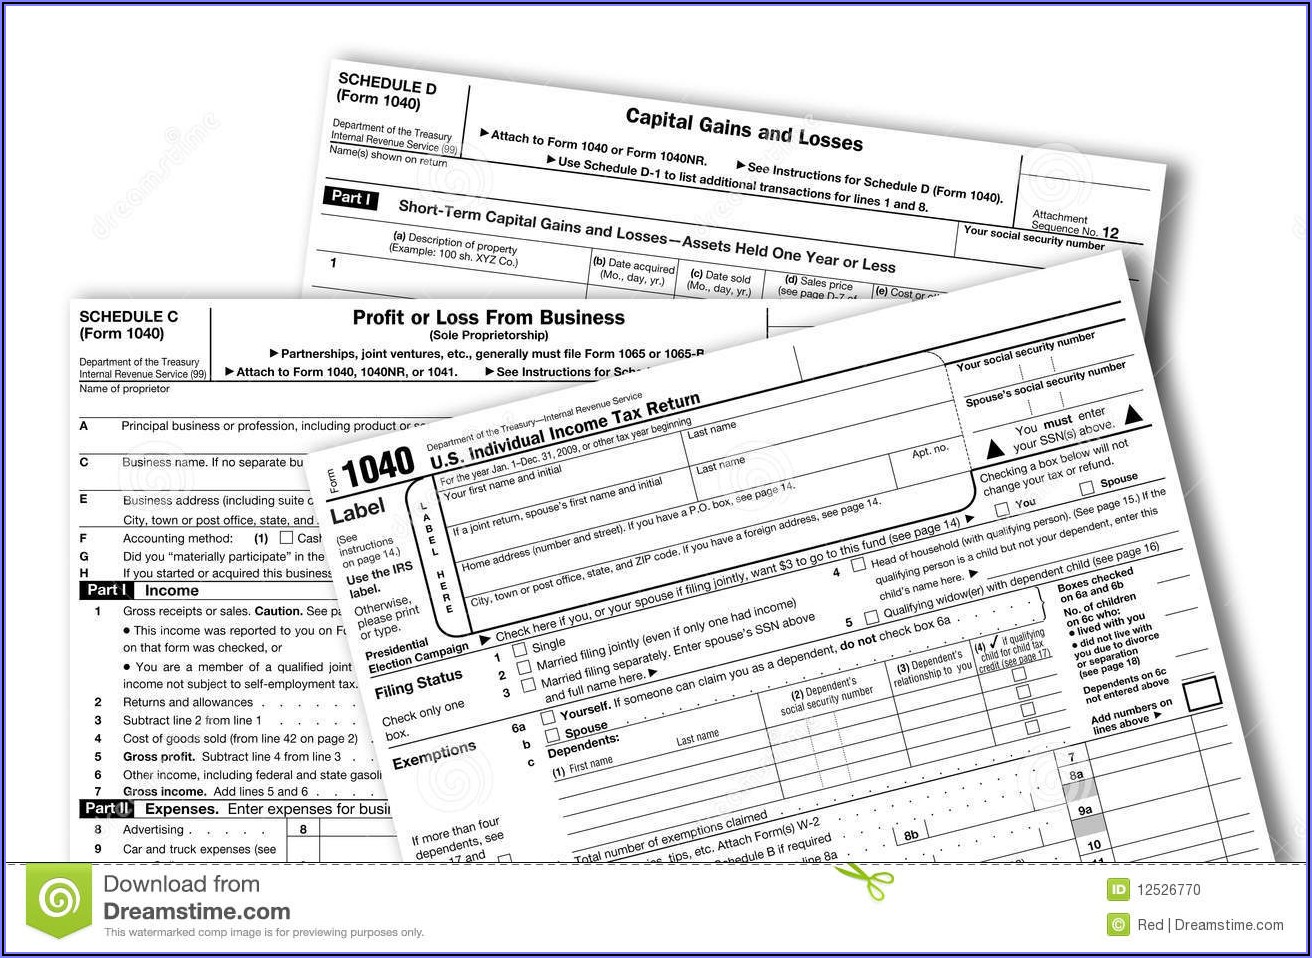 Federal Tax Forms 1040a